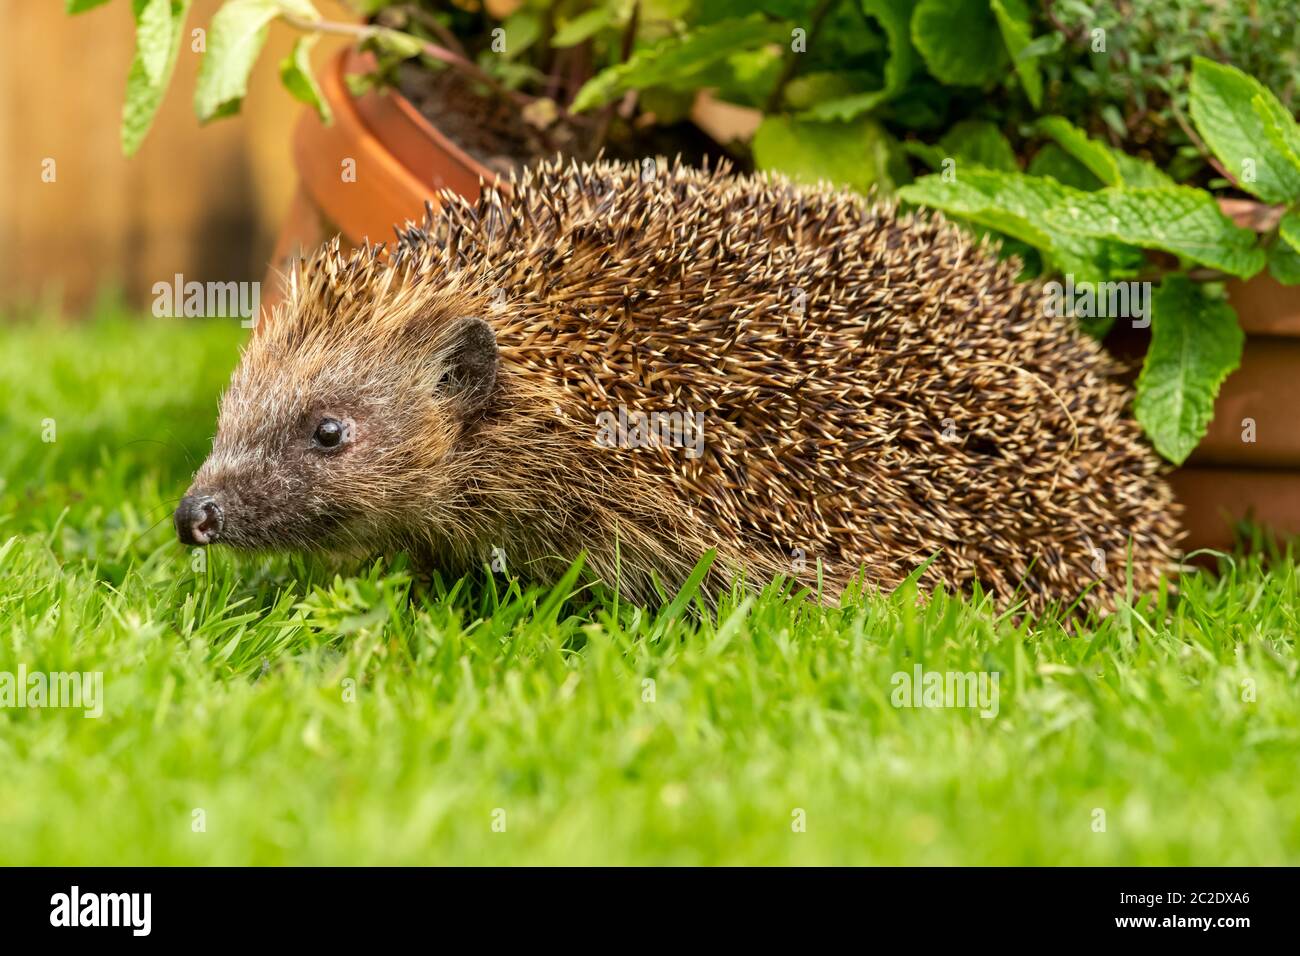 Hedgehog (Scientific name: Erinaceus Europaeus).  Wild, native, European hedgehog in a herb garden with plant pots and mint.  Facing left. Close up. Stock Photo